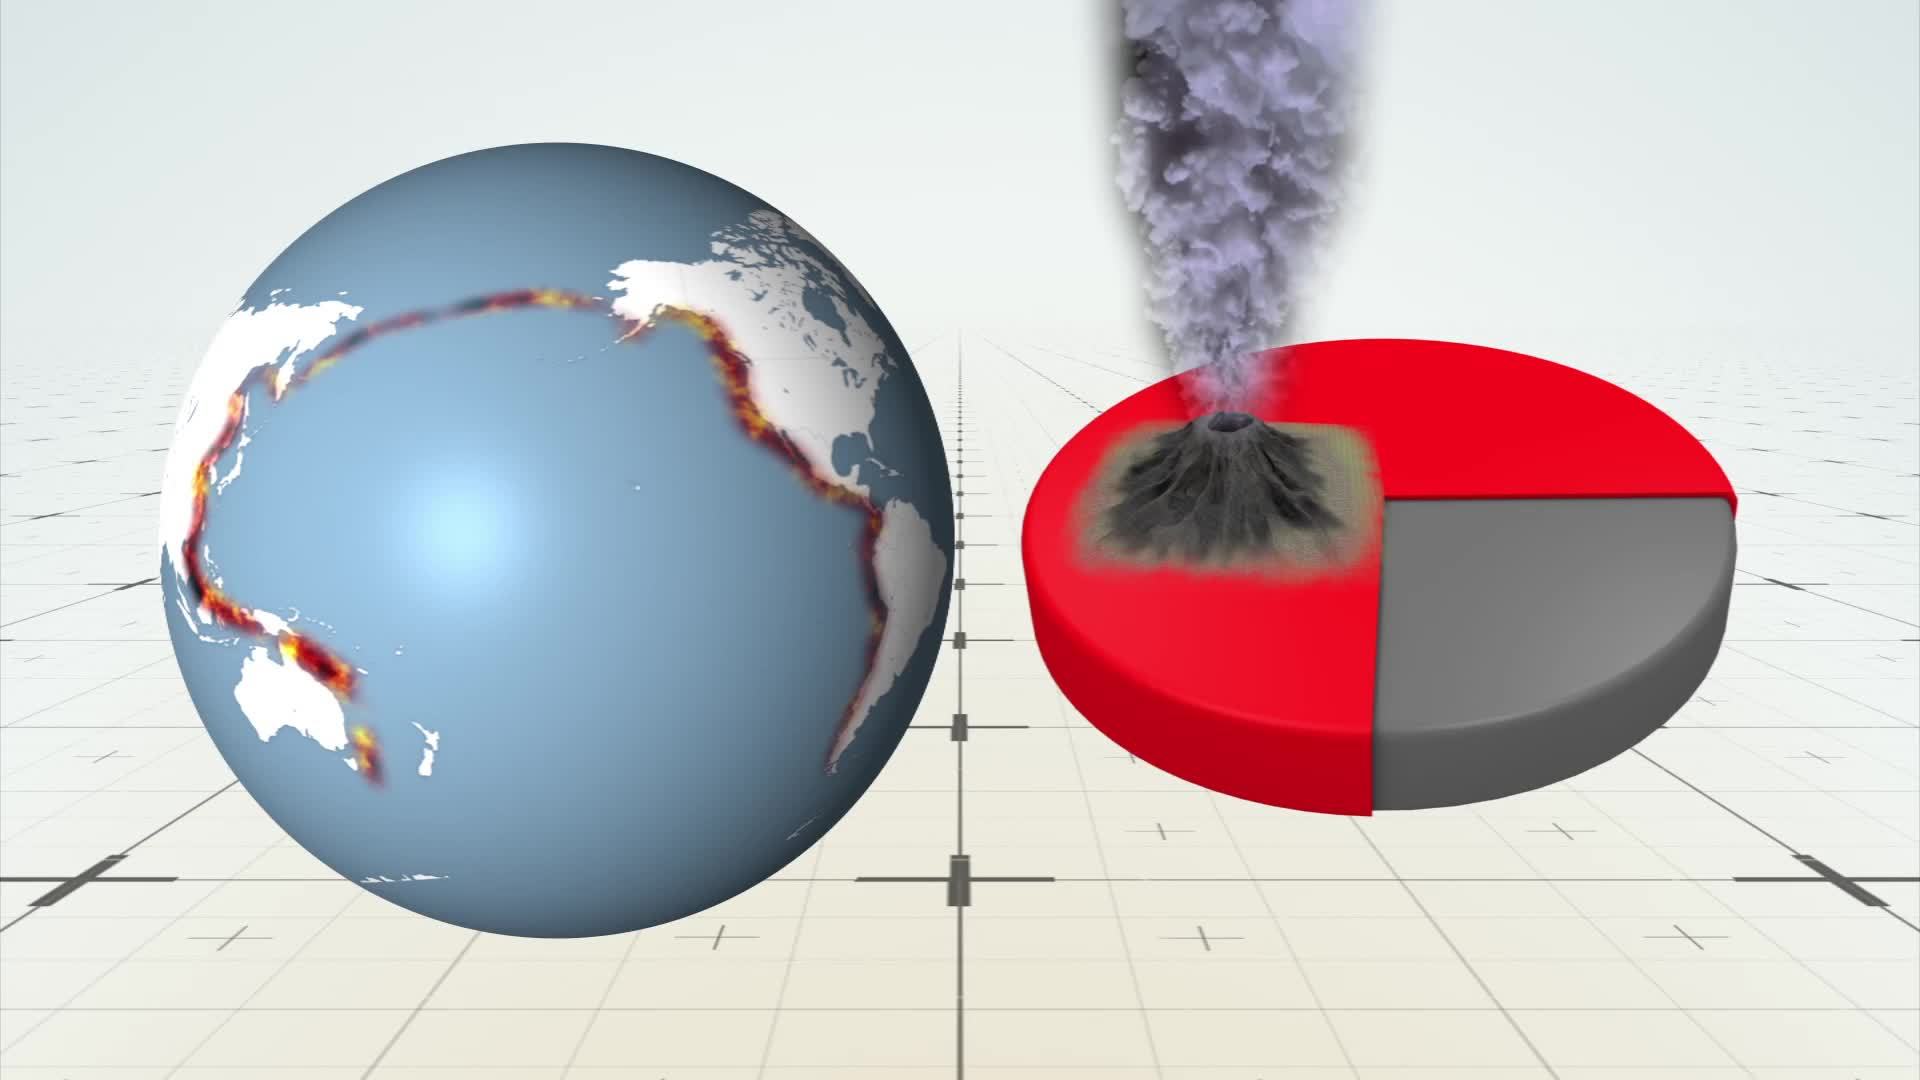 Ring of Fire: Earthquakes and volcanic eruptions around the Pacific explained